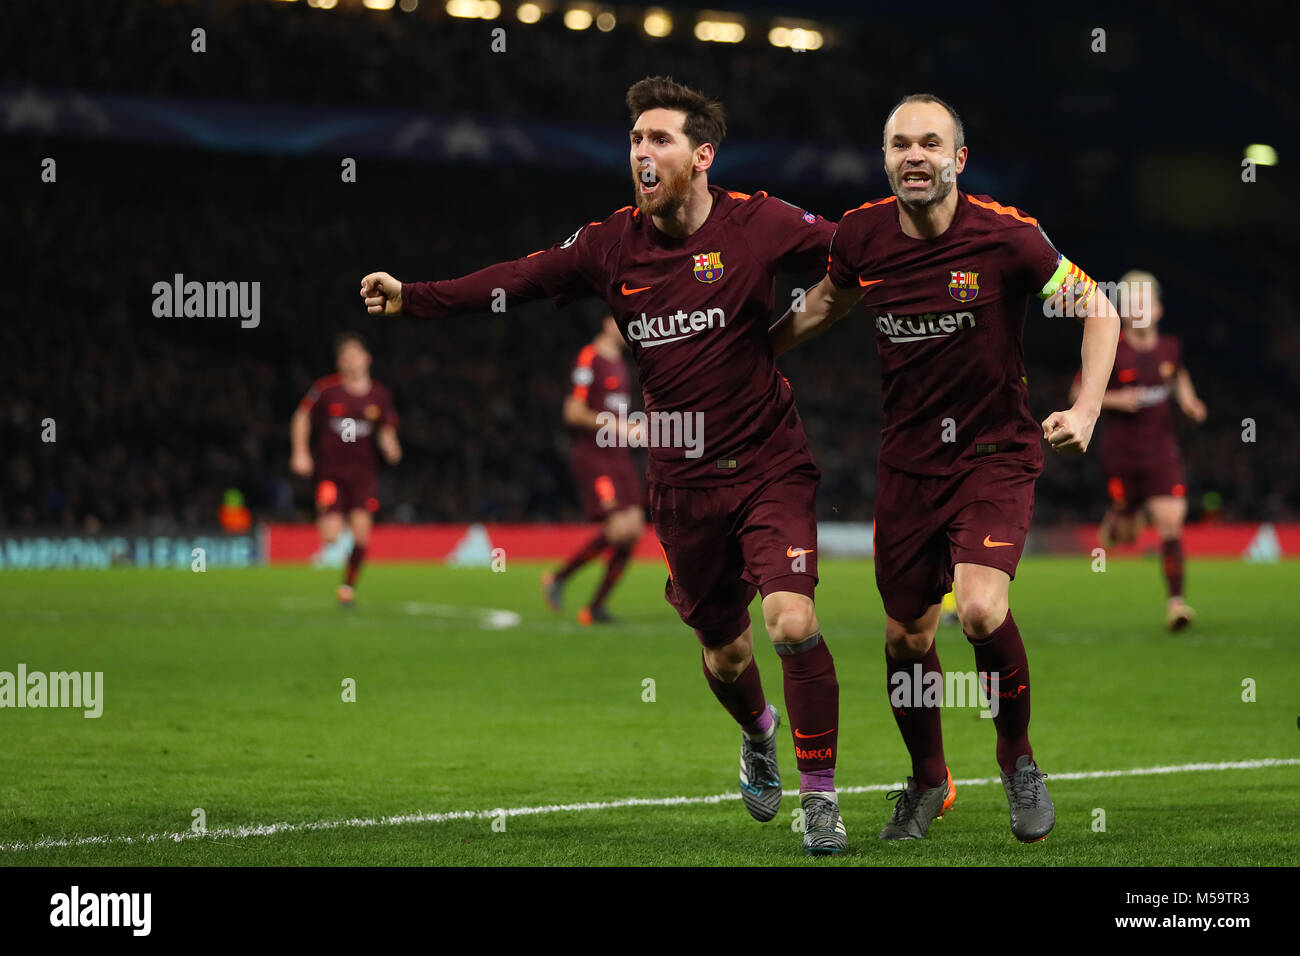 London, UK. 20th February, 2018. Lionel Messi (left) of Barcelona celebrates with Andres Iniesta after scoring the equalising goal, making it 1-1- Chelsea v Barcelona, UEFA Champions League, Round of 16, 1st Leg, Stamford Bridge, London - 20th February 2018. Credit: Richard Calver/Alamy Live News Stock Photo